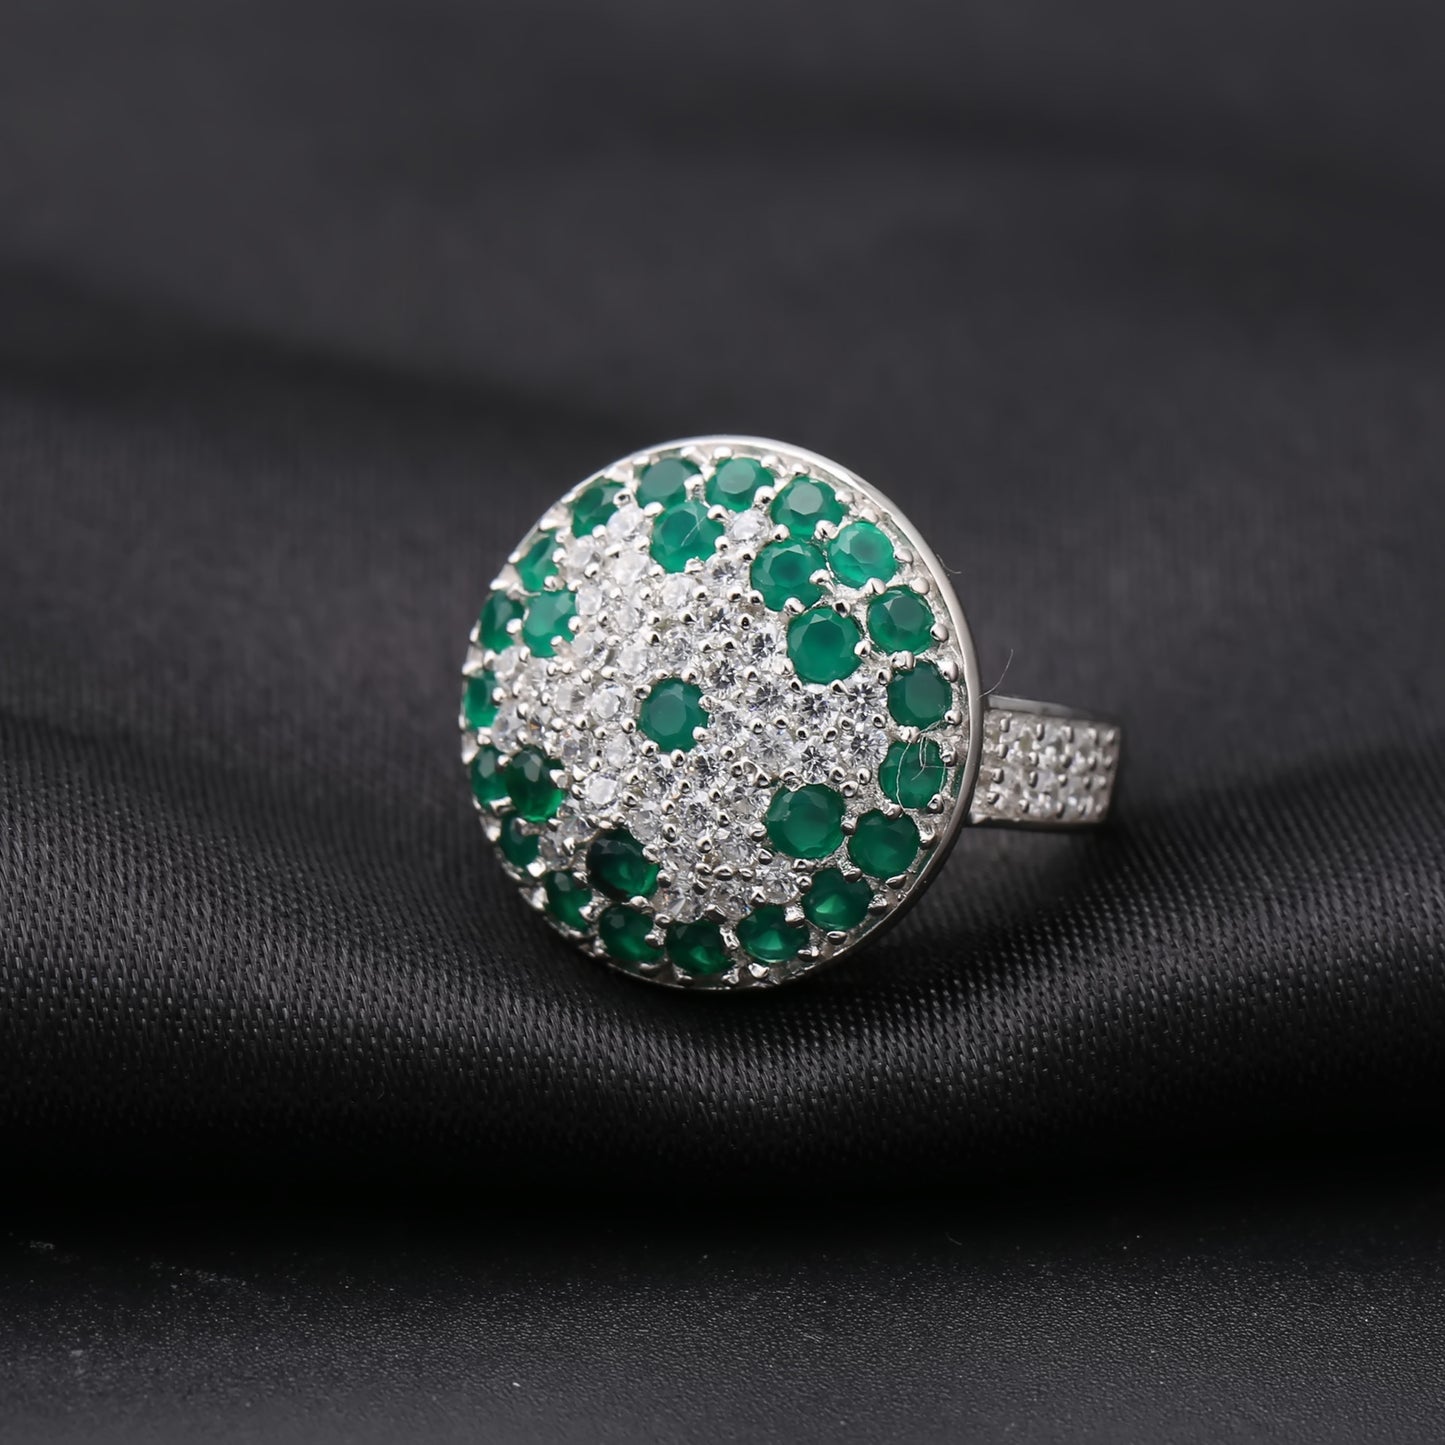 European Vintage Style Inlaid Green Agate Round Shape Silver Ring for Women